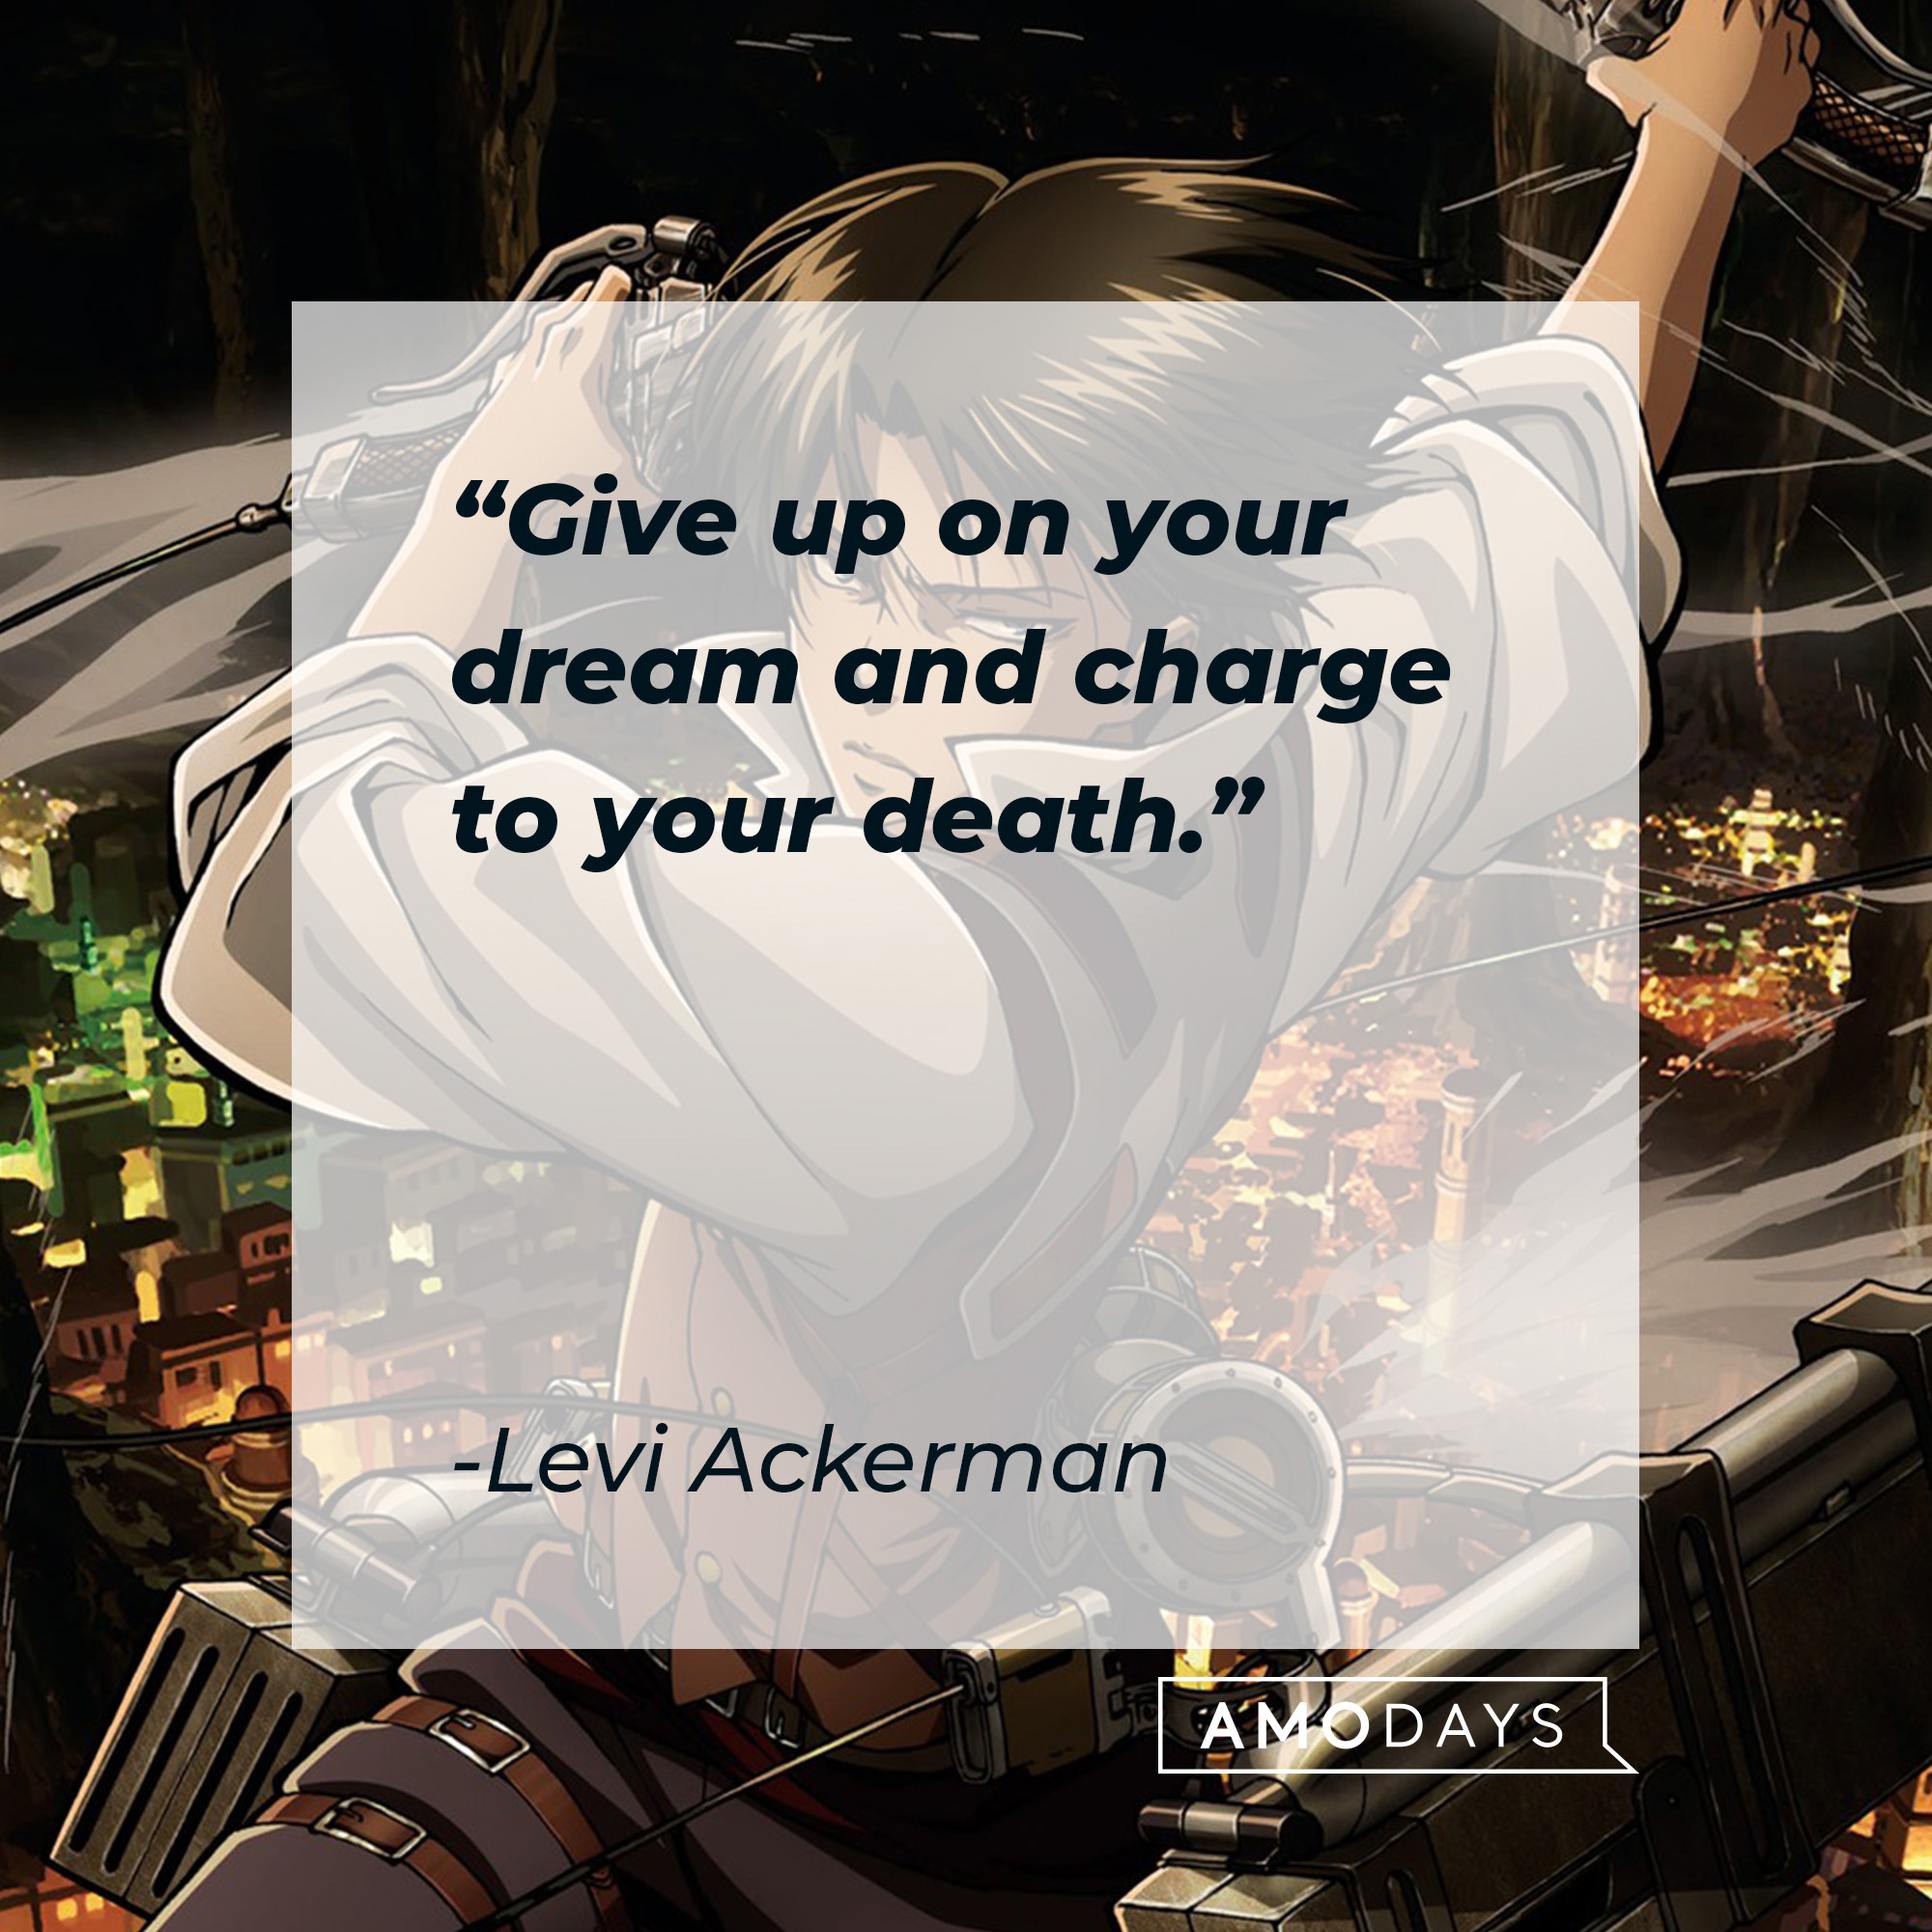 Levi Ackerman, with his quote: "Give up on your dream and charge to your death." │ Source: facebook.com/AttackOnTitan